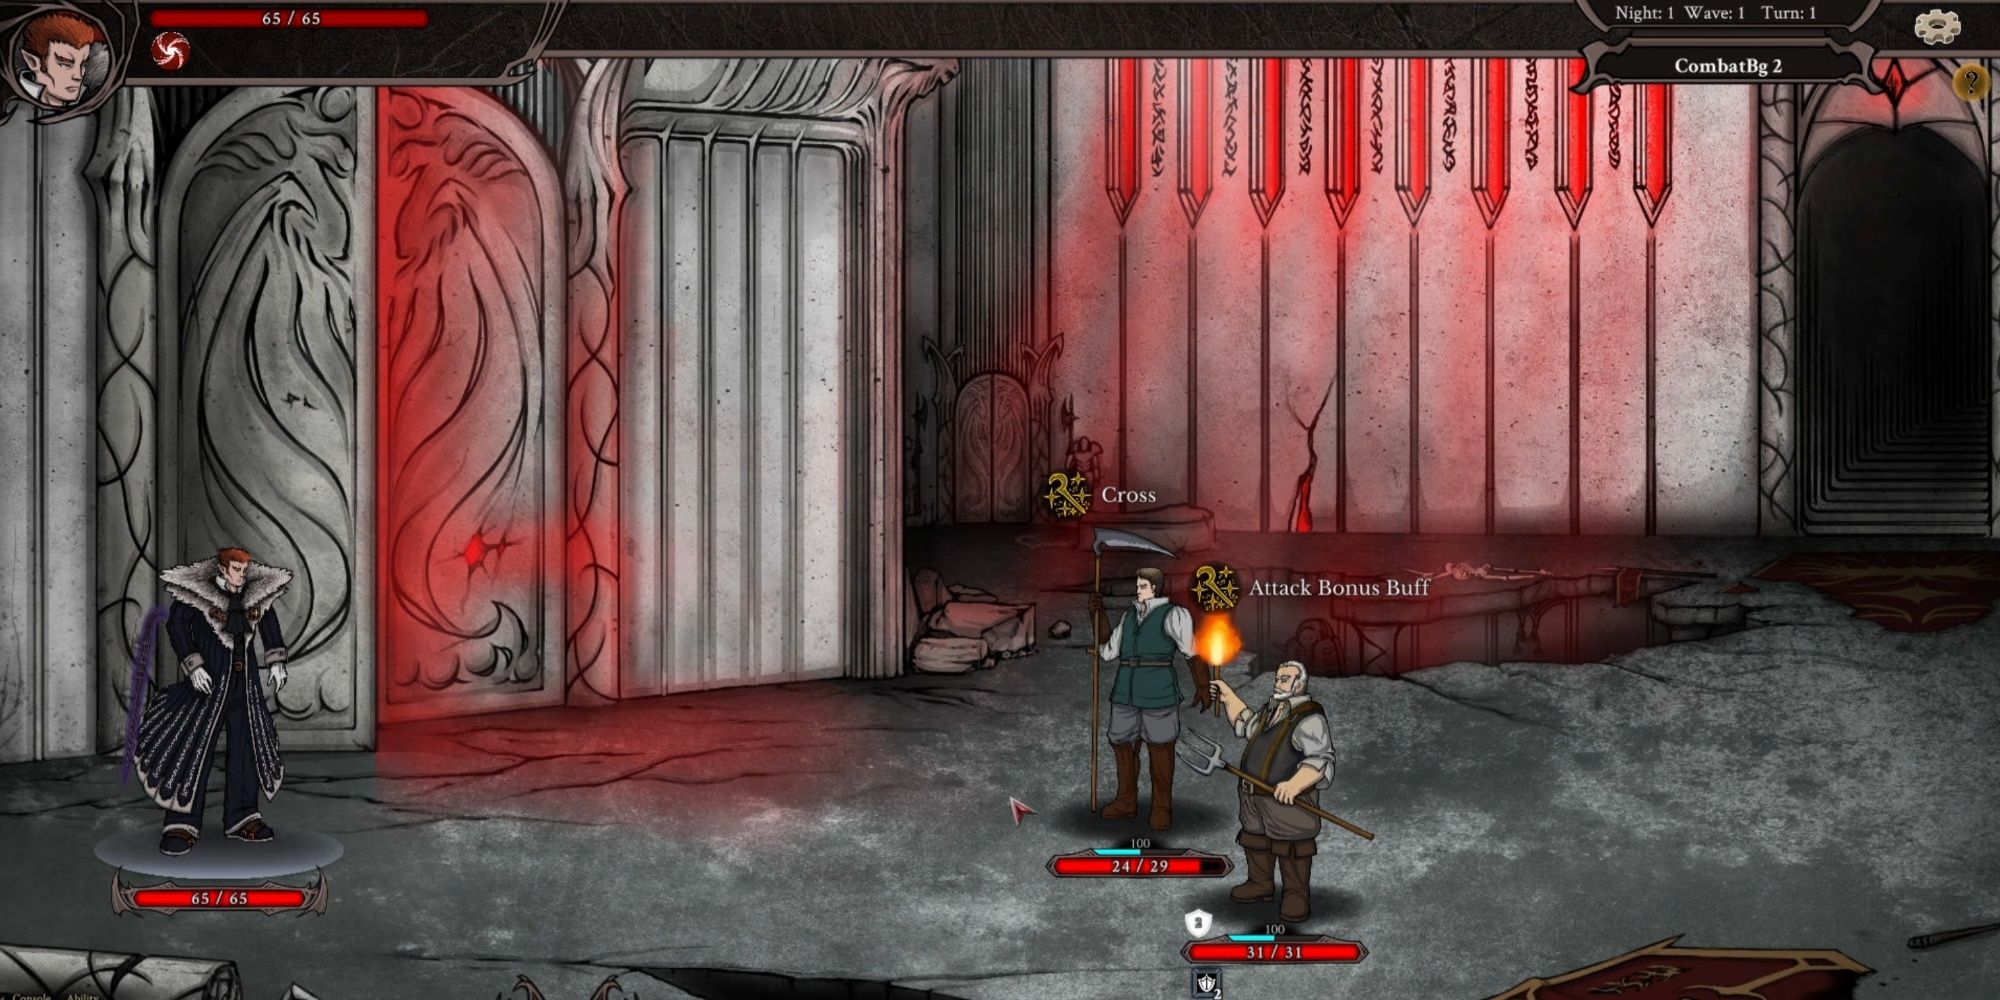 Your vampire lord character with health bar displayed underneath in one corner going up against two enemies with pitchforks and scythes in a castle environment.